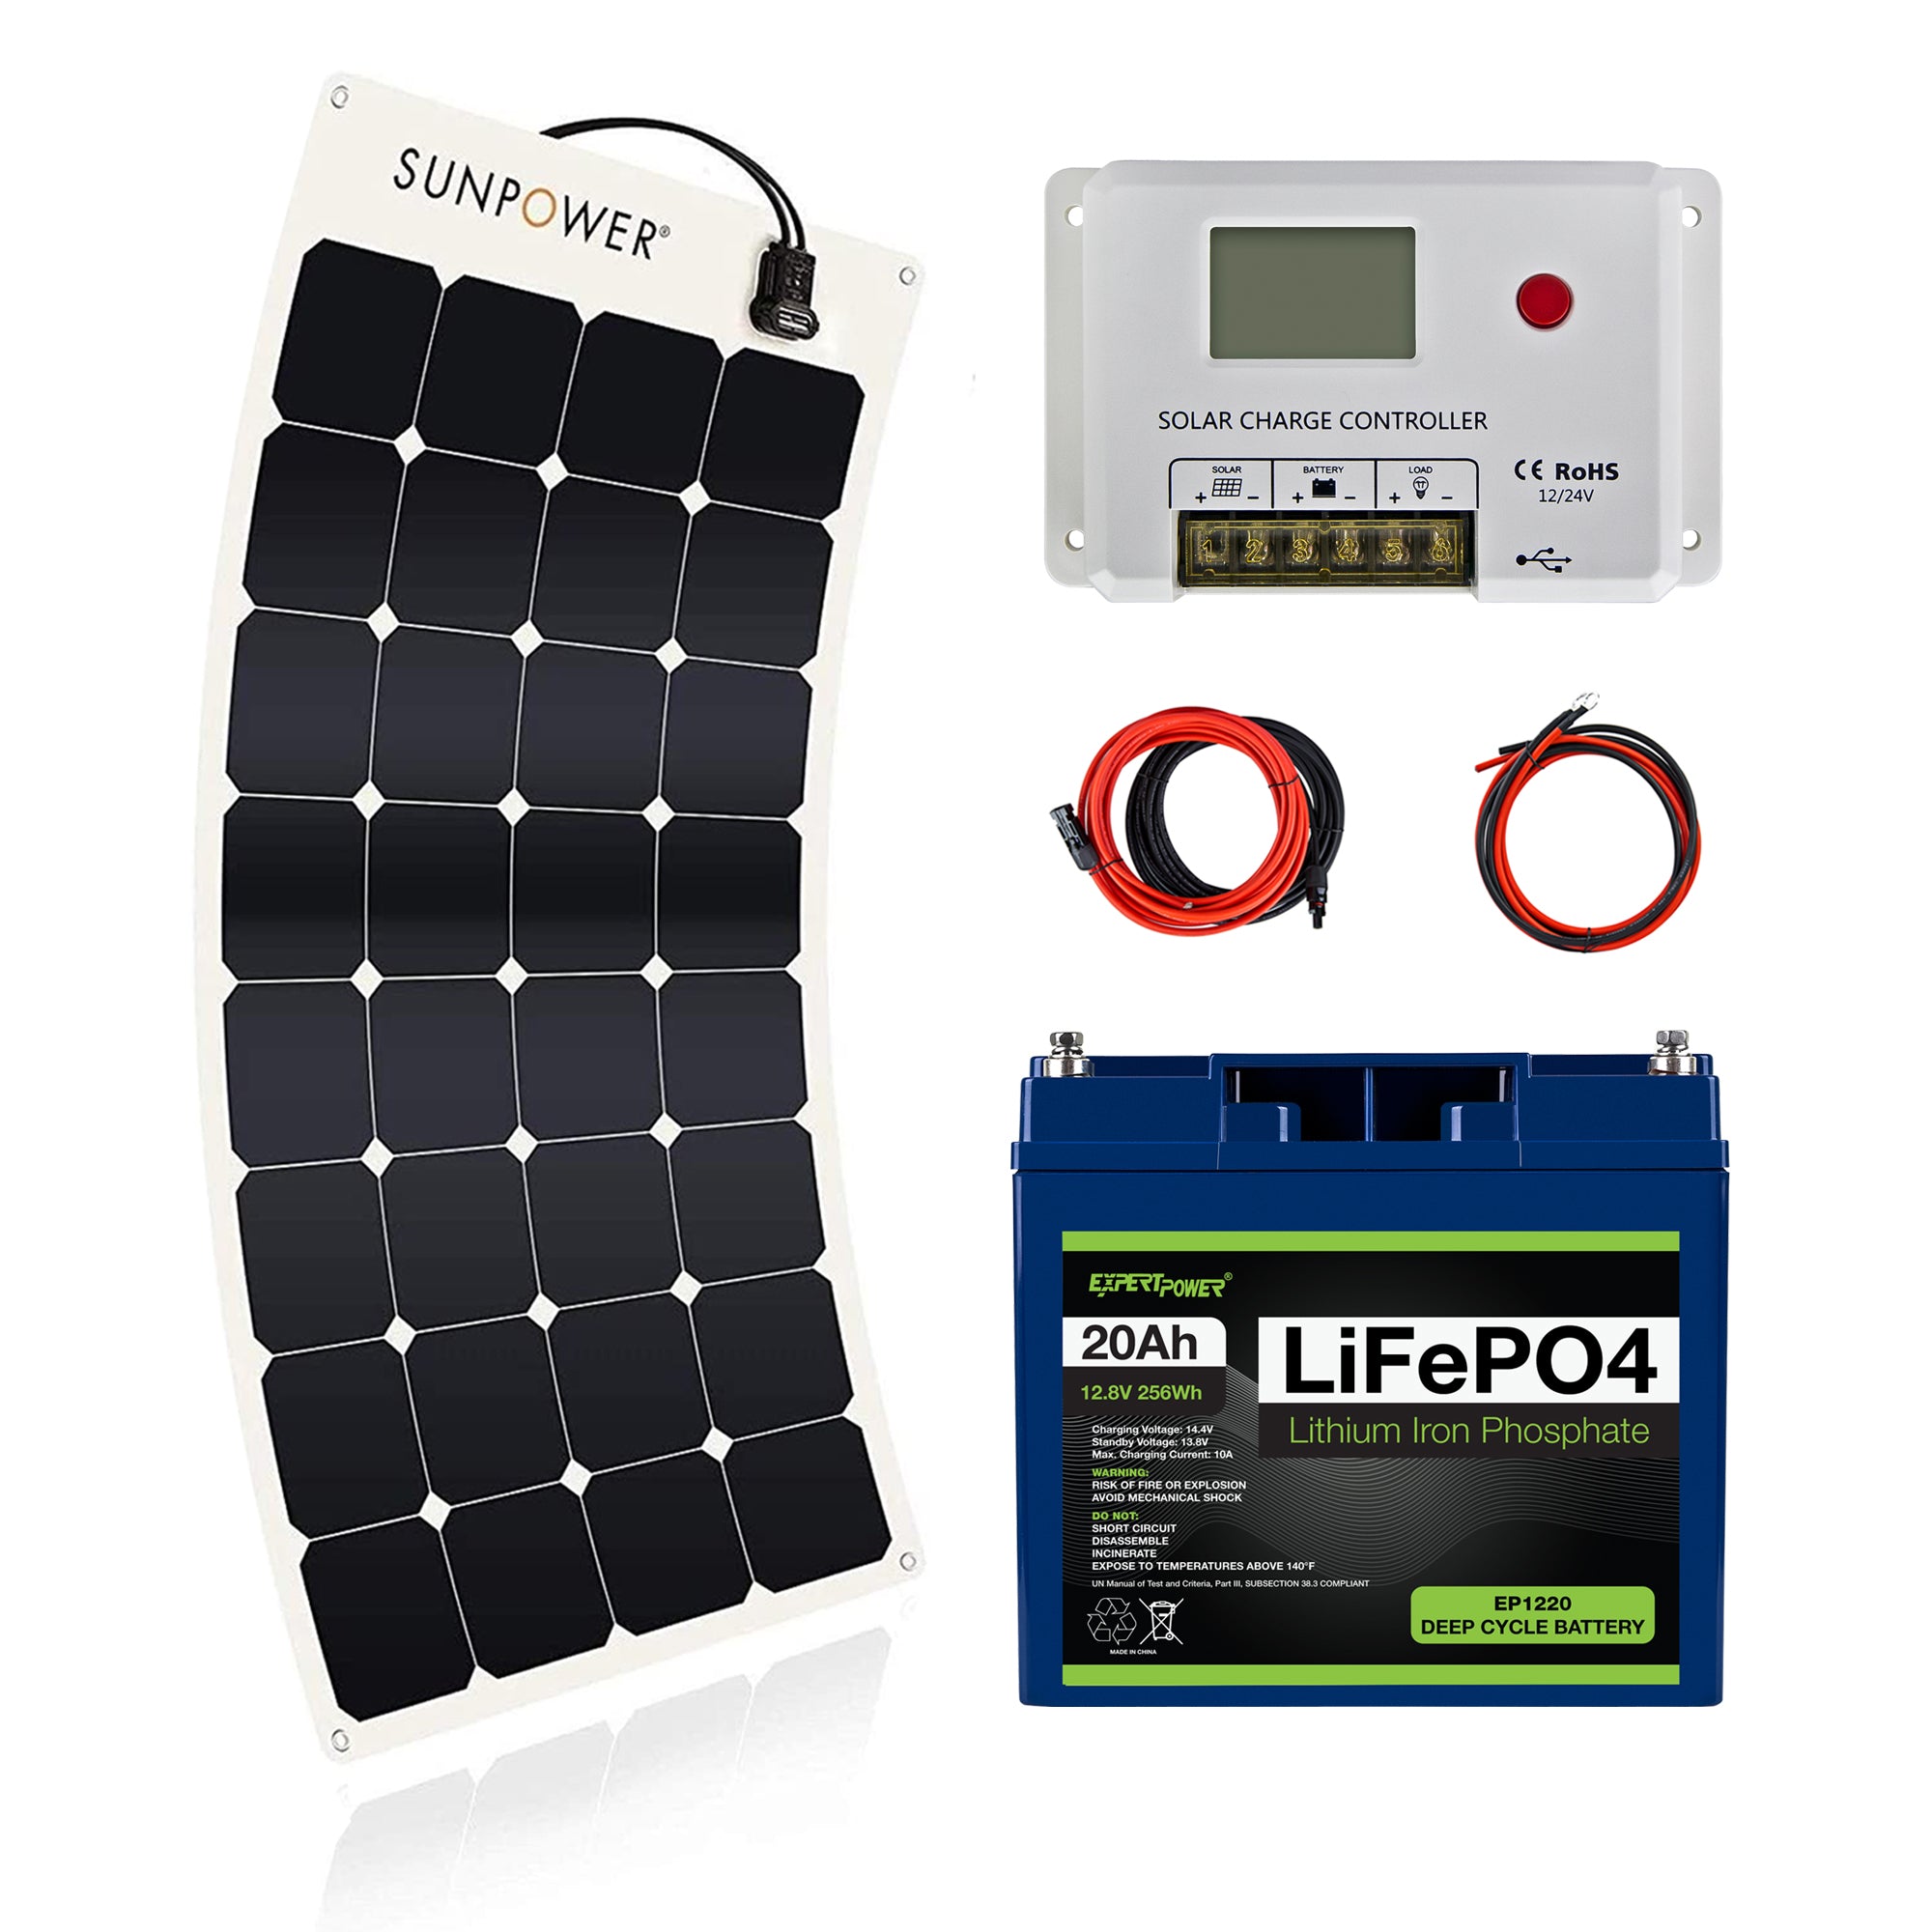 12v 20A DCDC BATTERY-TO-BATTERY CHARGER WITH SOLAR INPUT KIT